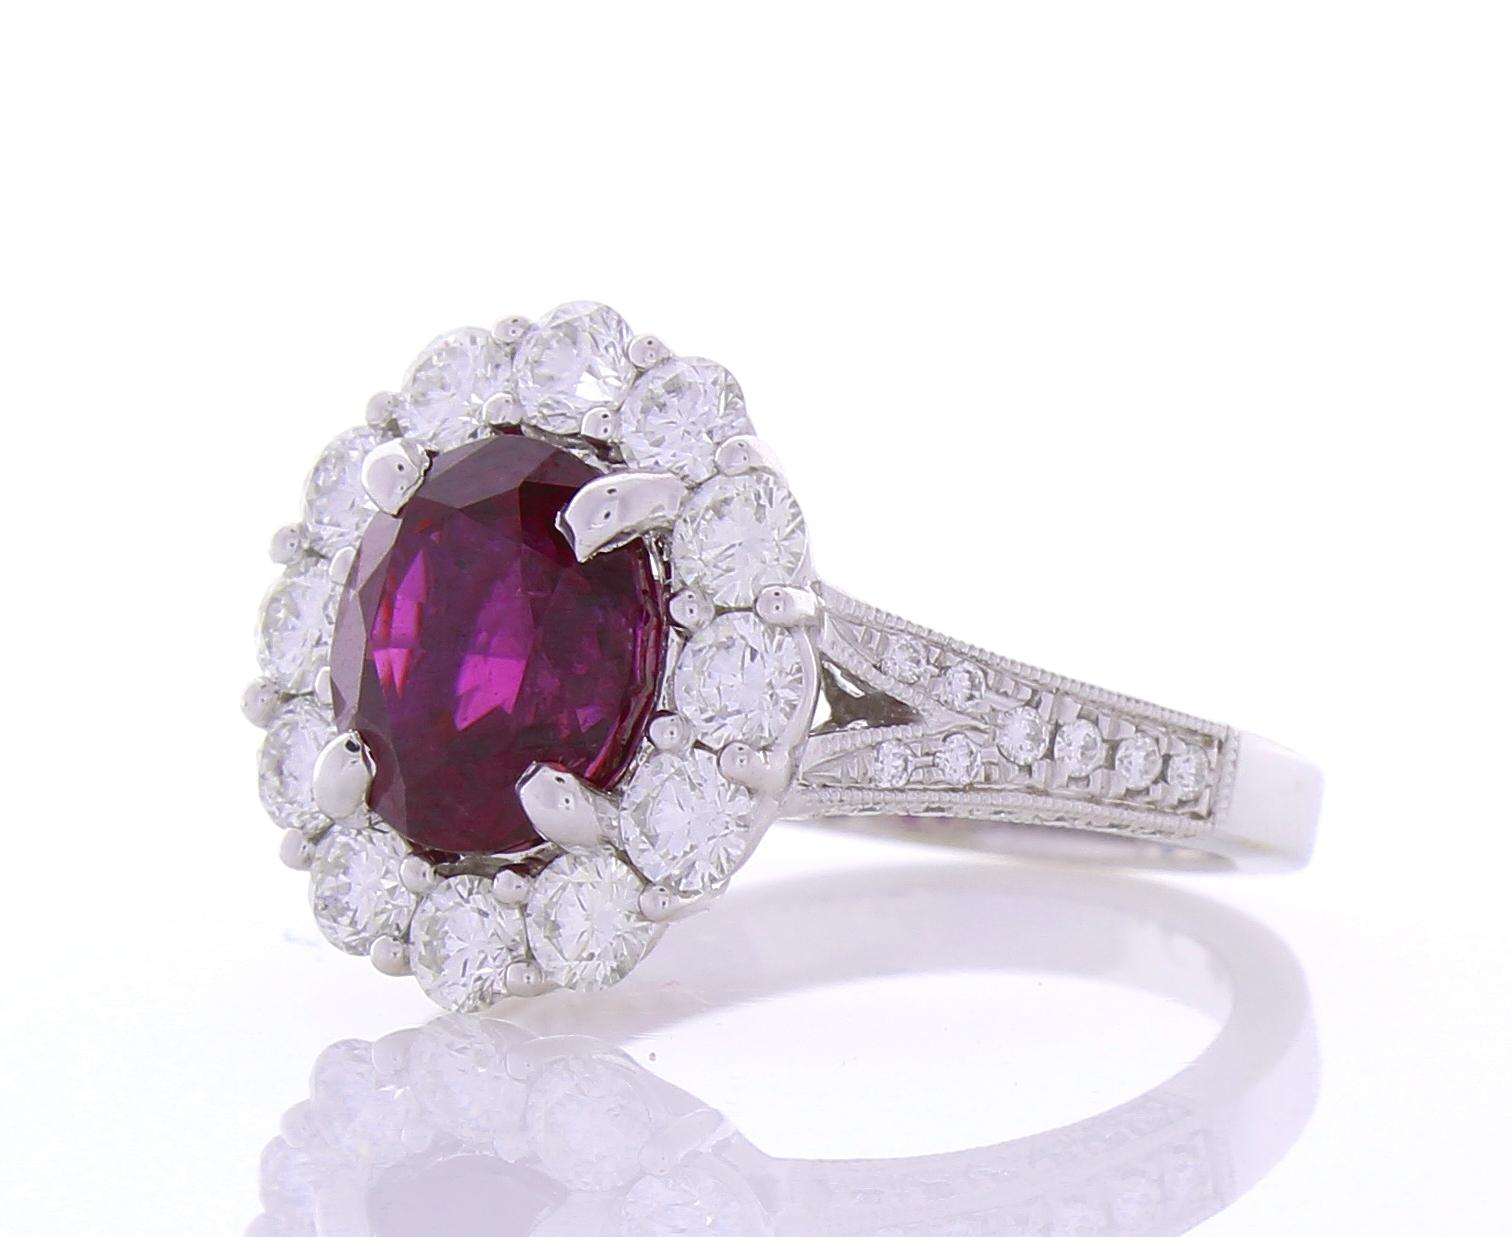 Contemporary 2.97 Carat Oval Purple Sapphire and Diamond Cocktail Ring in 18 Karat White Gold